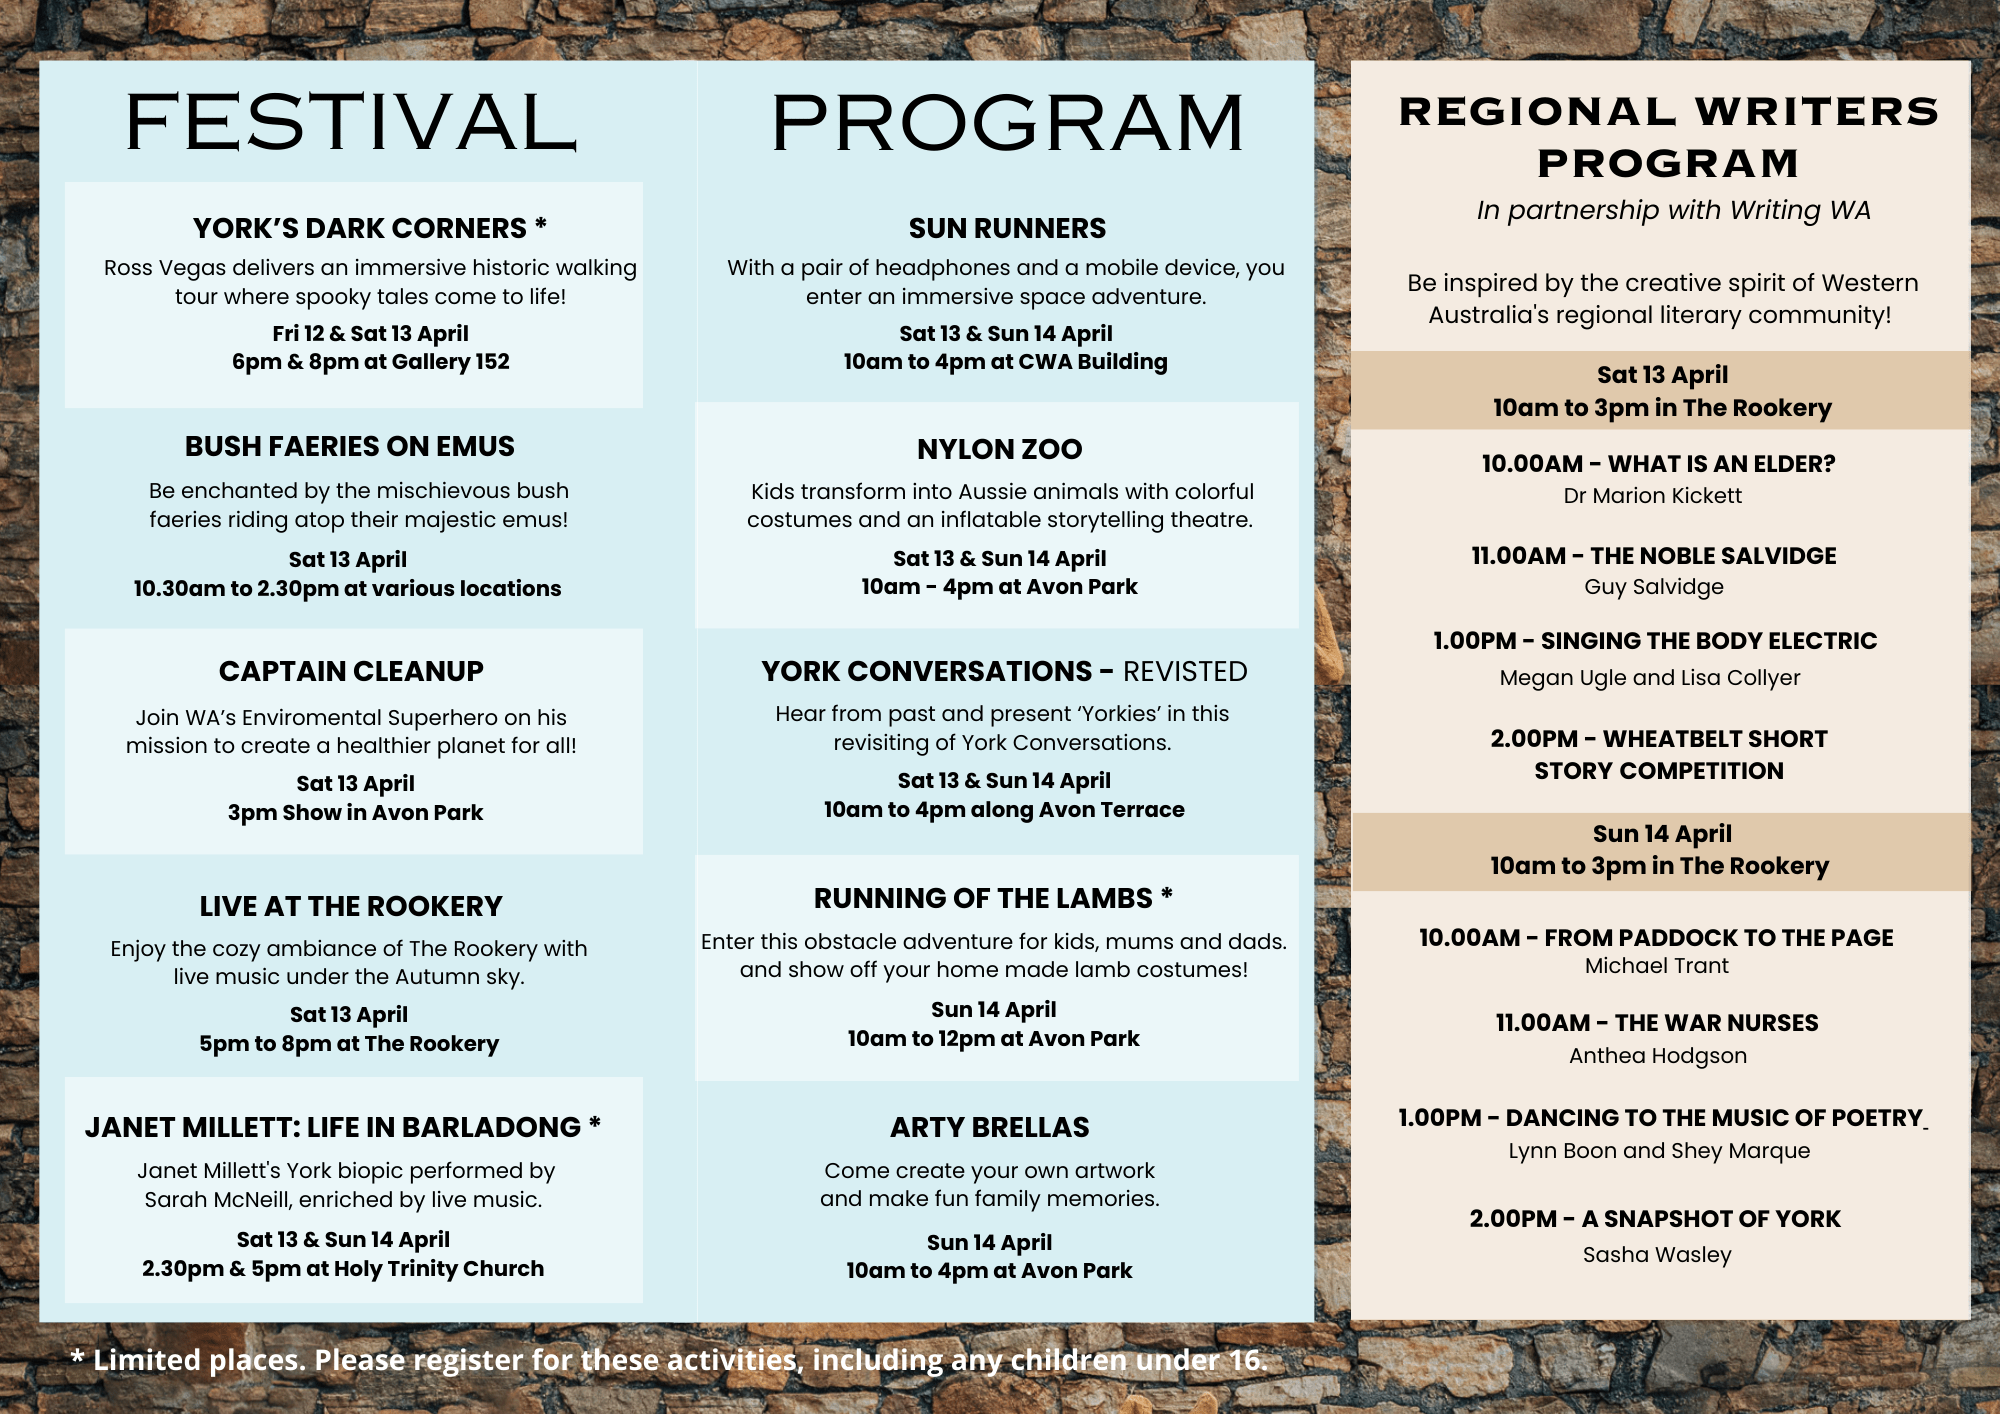 Program timetable and activities